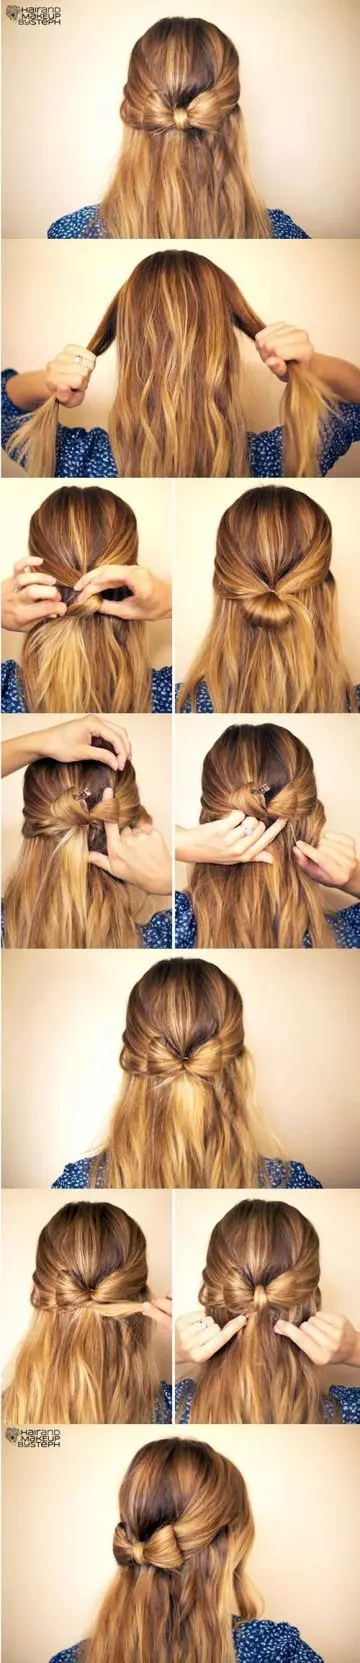 Half-up bow hairstyle tutorial for girls with long hair